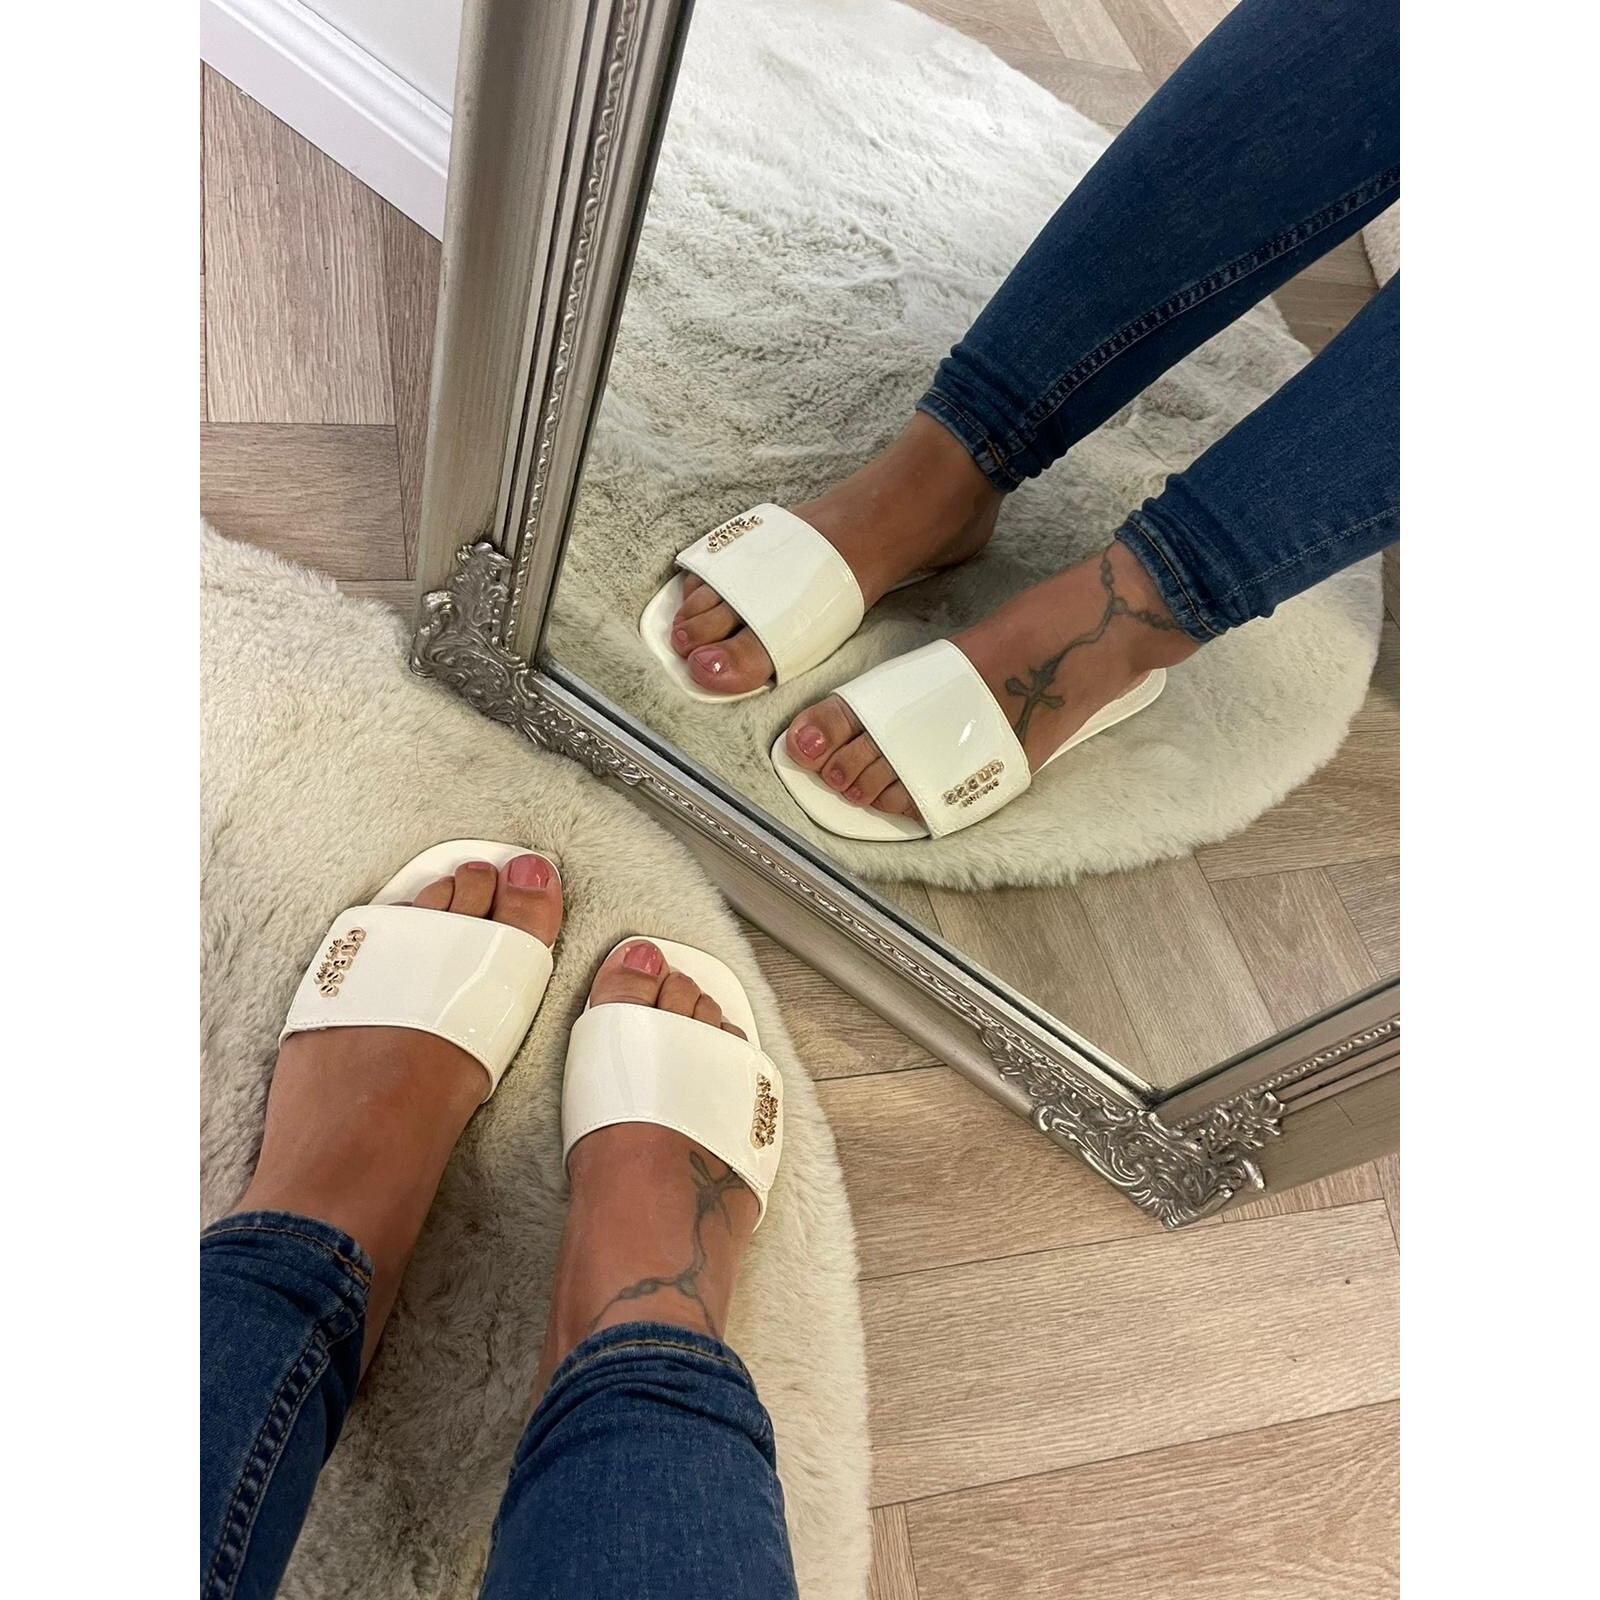 Guess Slippers Julie Ivory  Guess 738